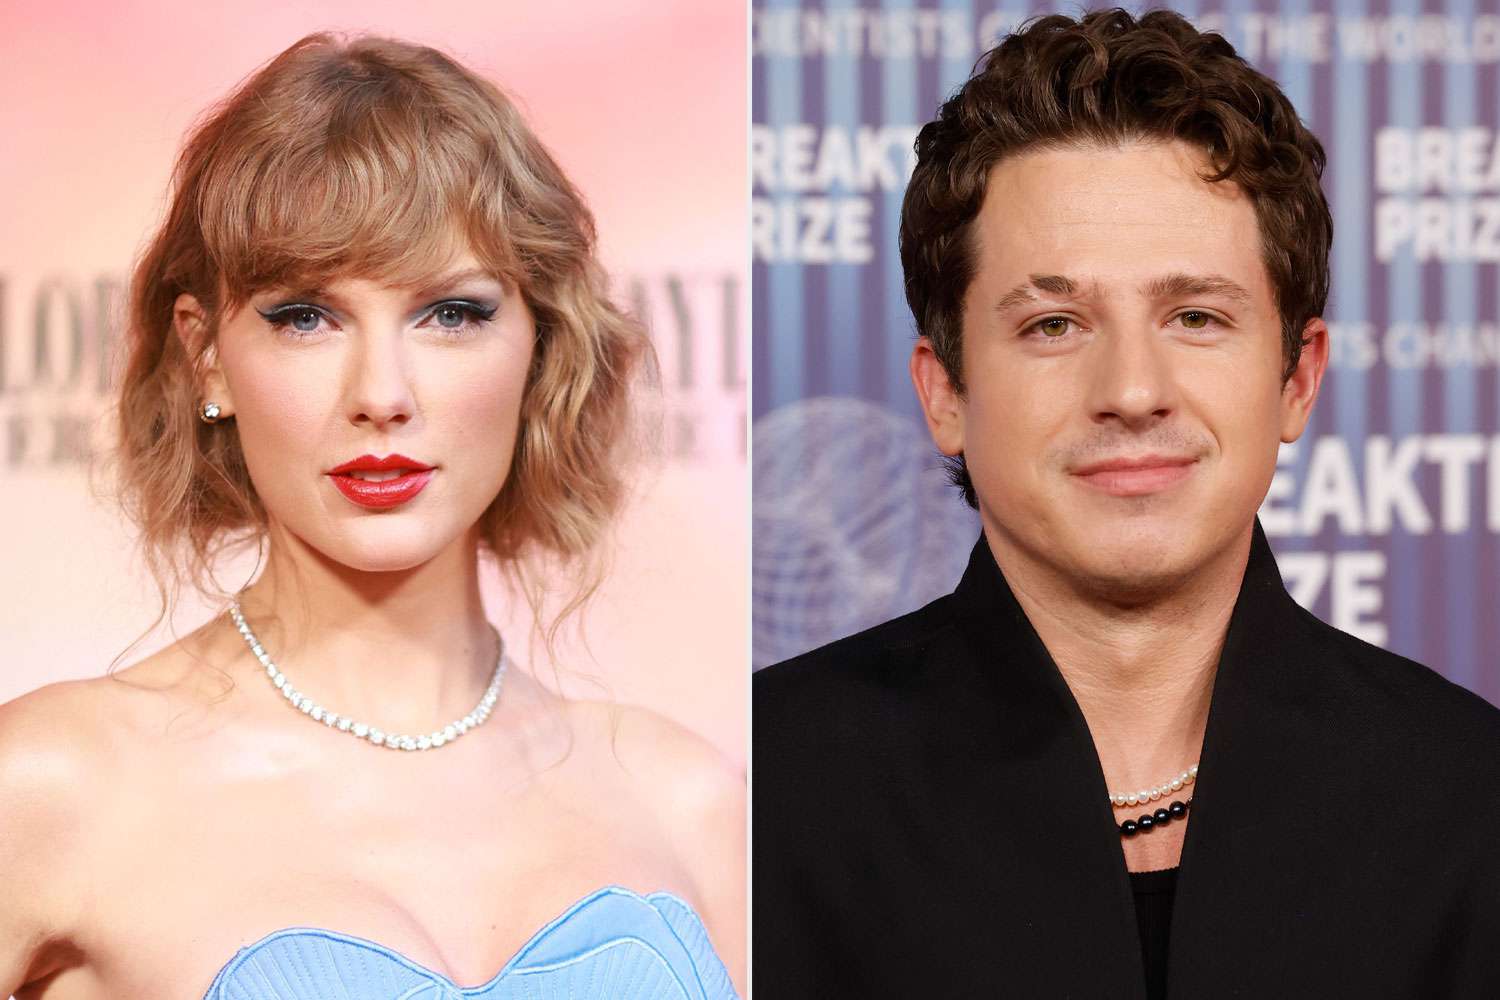 Charlie Puth Alludes to Taylor Swift’s Name Check as He Teases New Song: ‘Thank You for Your Support’